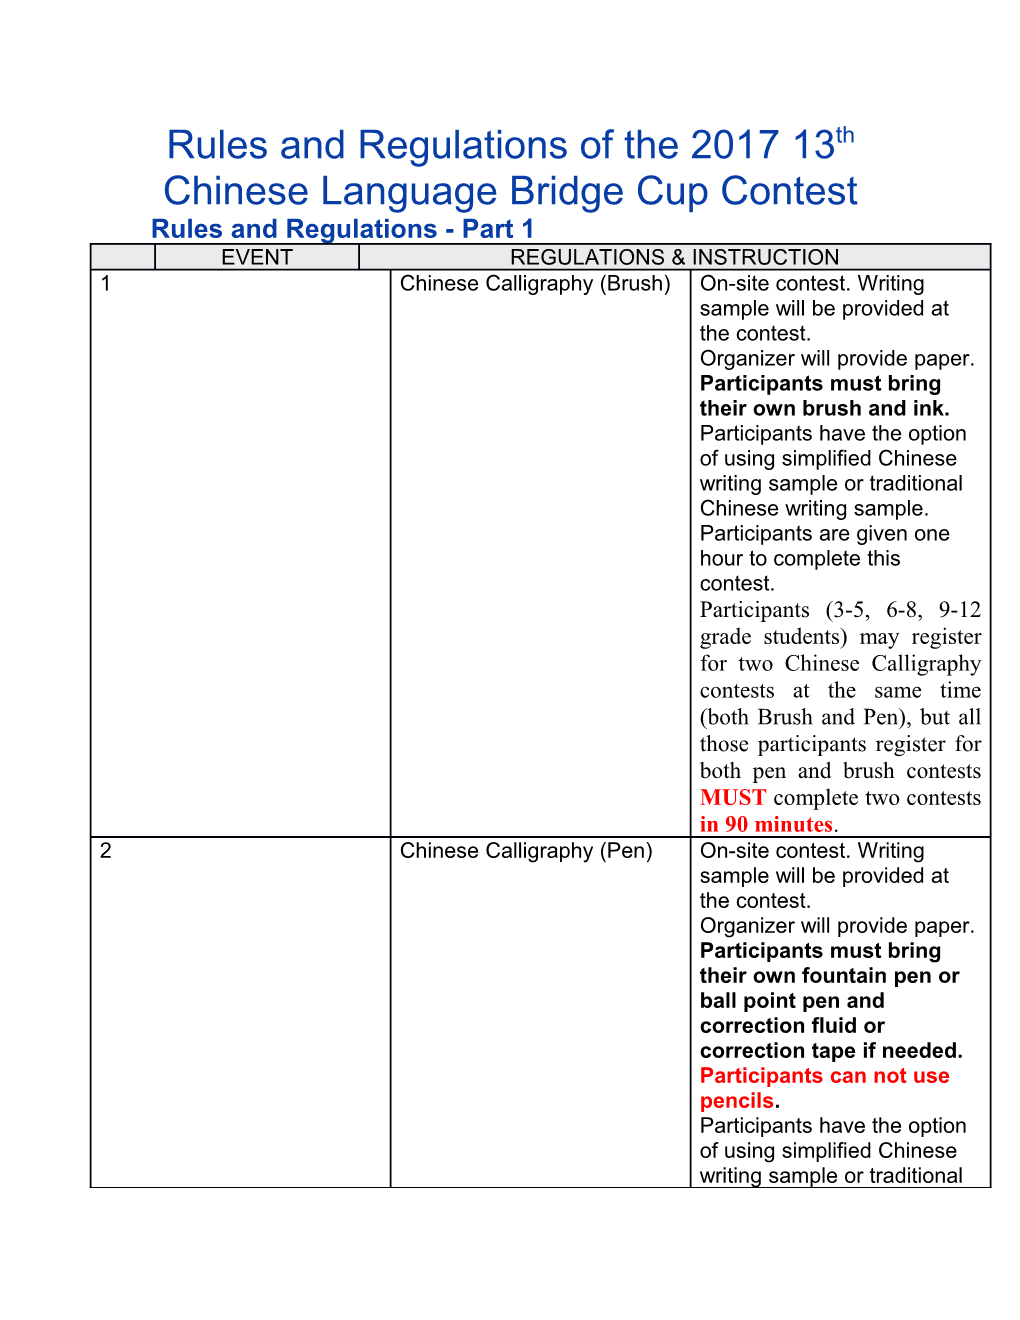 Rules and Regulations of the 2017 13Th Chinese Language Bridge Cup Contest